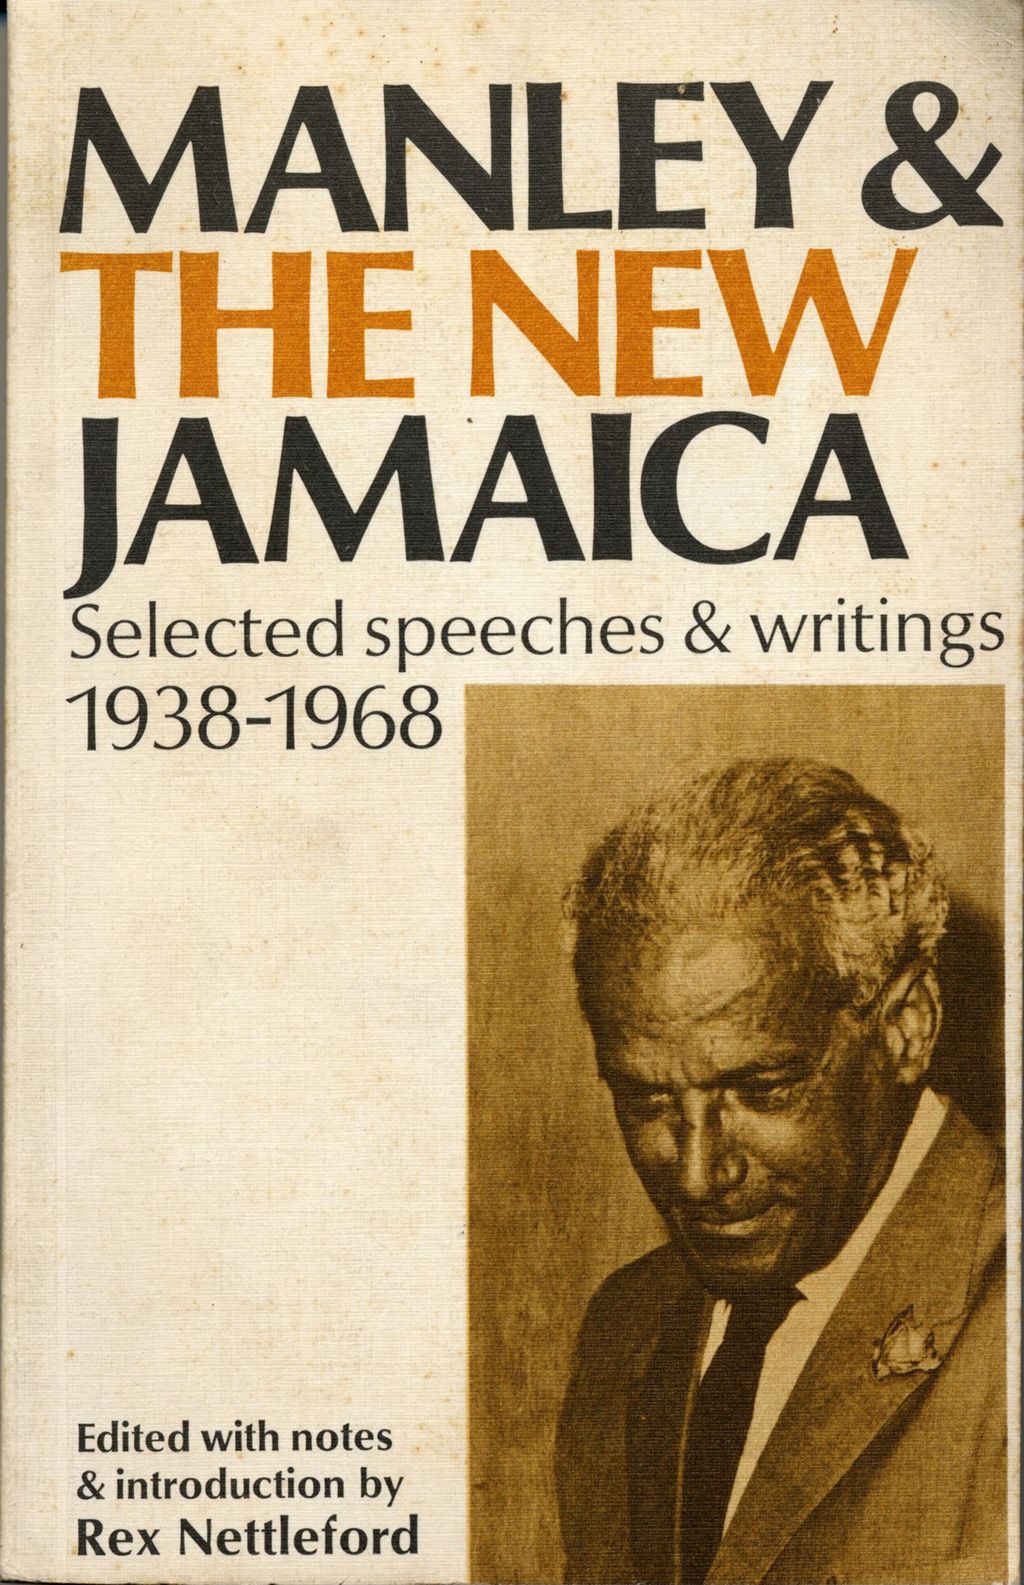 Miniature of Norman Washington Manley and the new Jamaica: selected speeches and writings, 1938-68 (paperback edition)